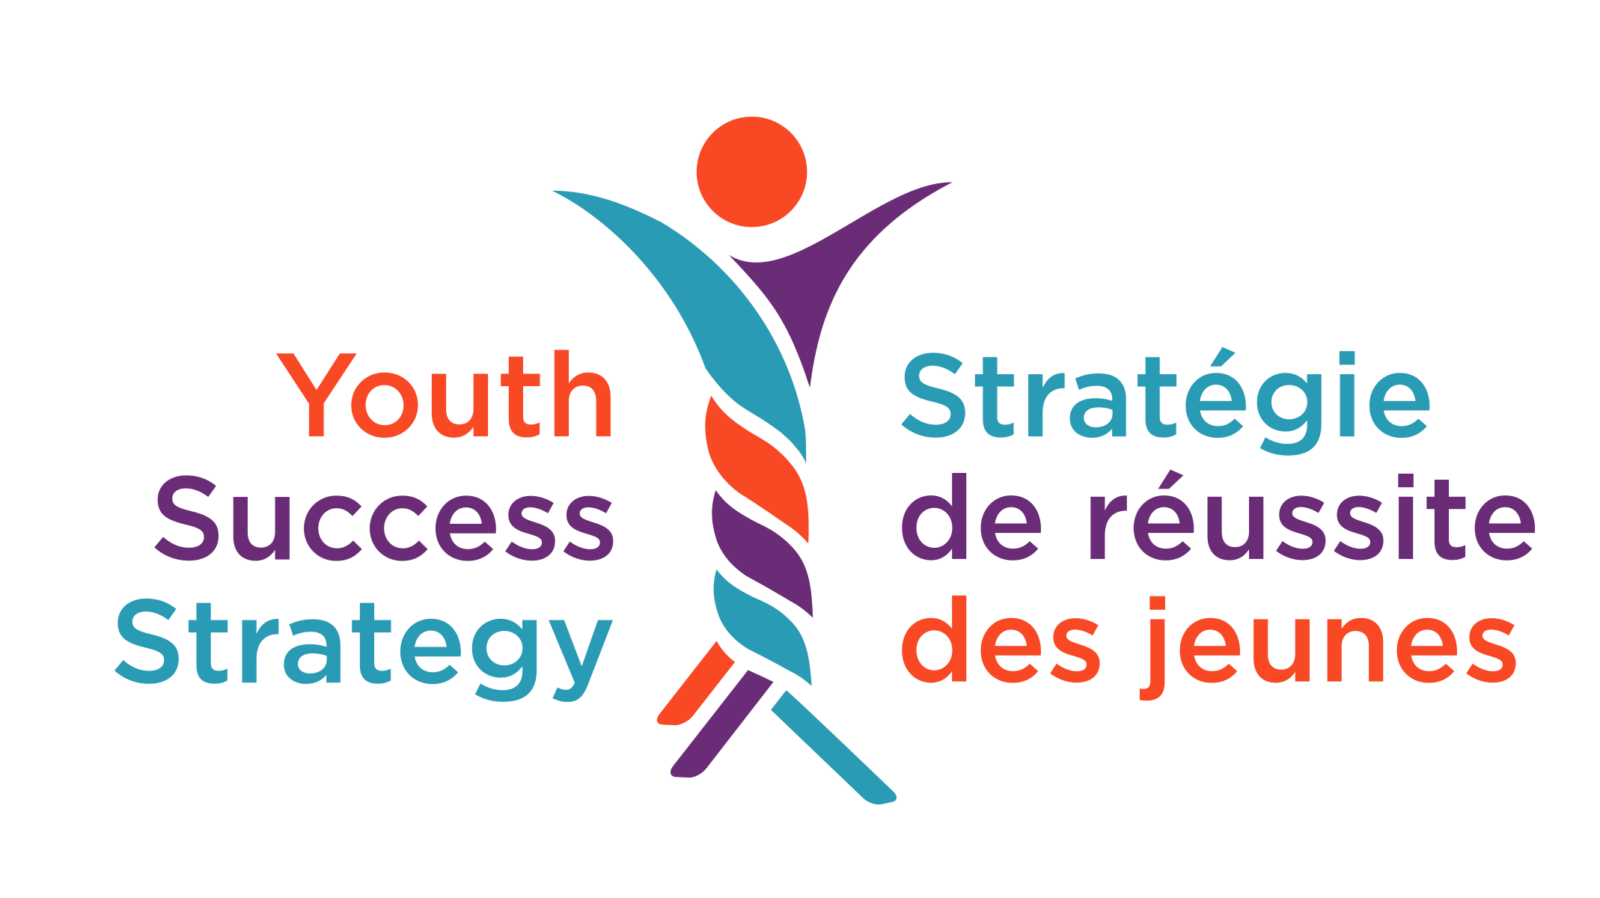 Youth Success Strategy writing on left in orange, blue and purple text. Symbol of a person in middle.  Strategie de réussite des jeunes text on right. 